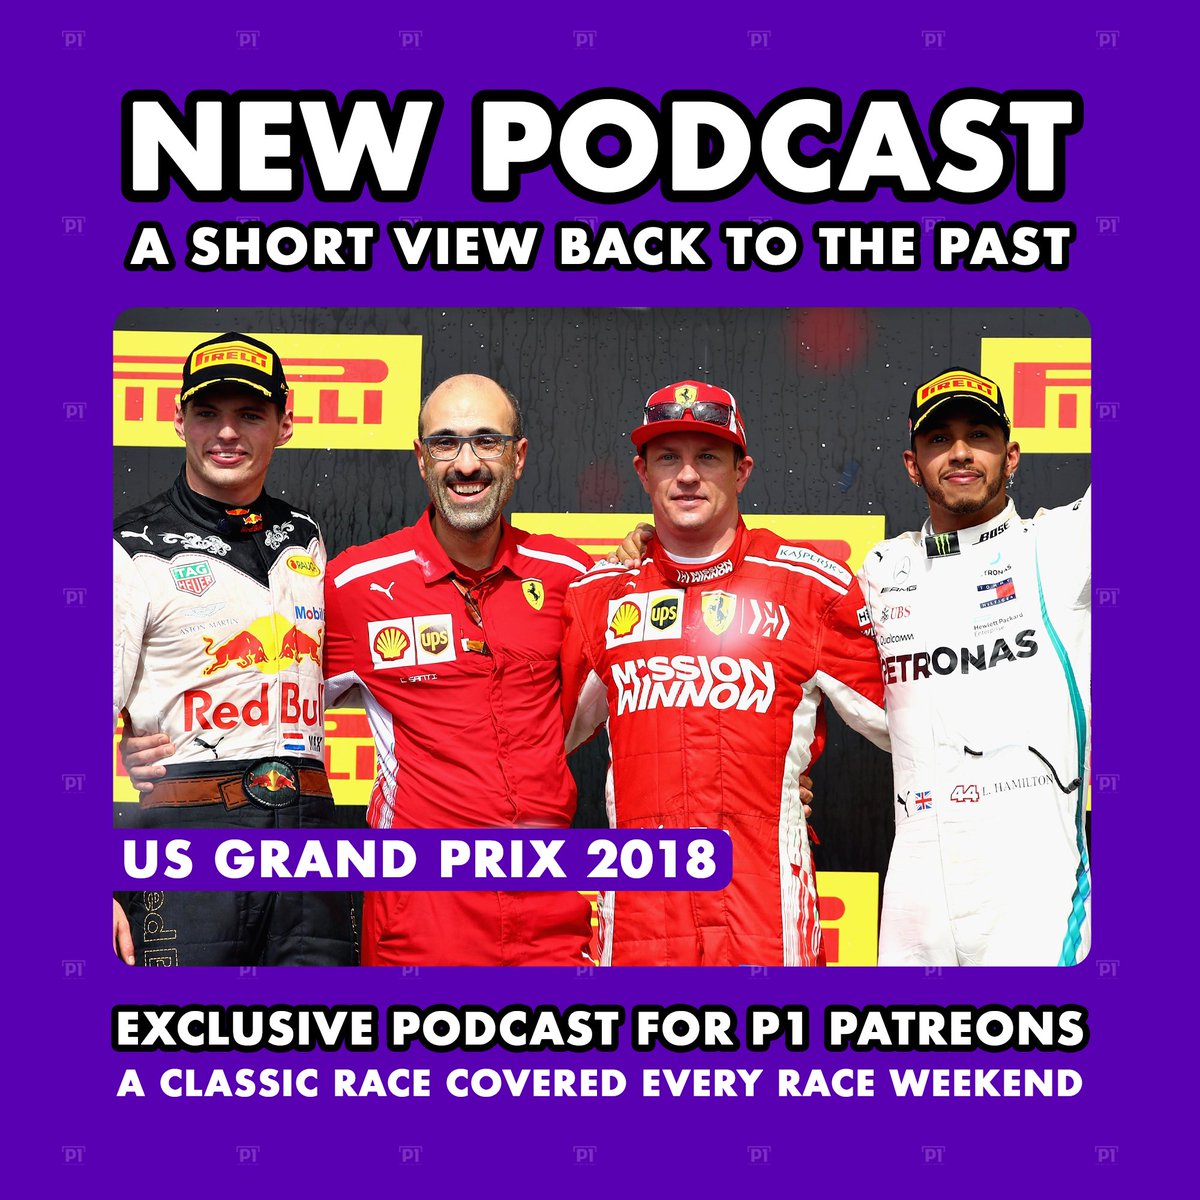 New Patreon pod! We reflect on an epic 2018 US Grand Prix at COTA where Kimi Raikkonen took victory for the first time in 113 years 🎙️ patreon.com/mattp1tommy